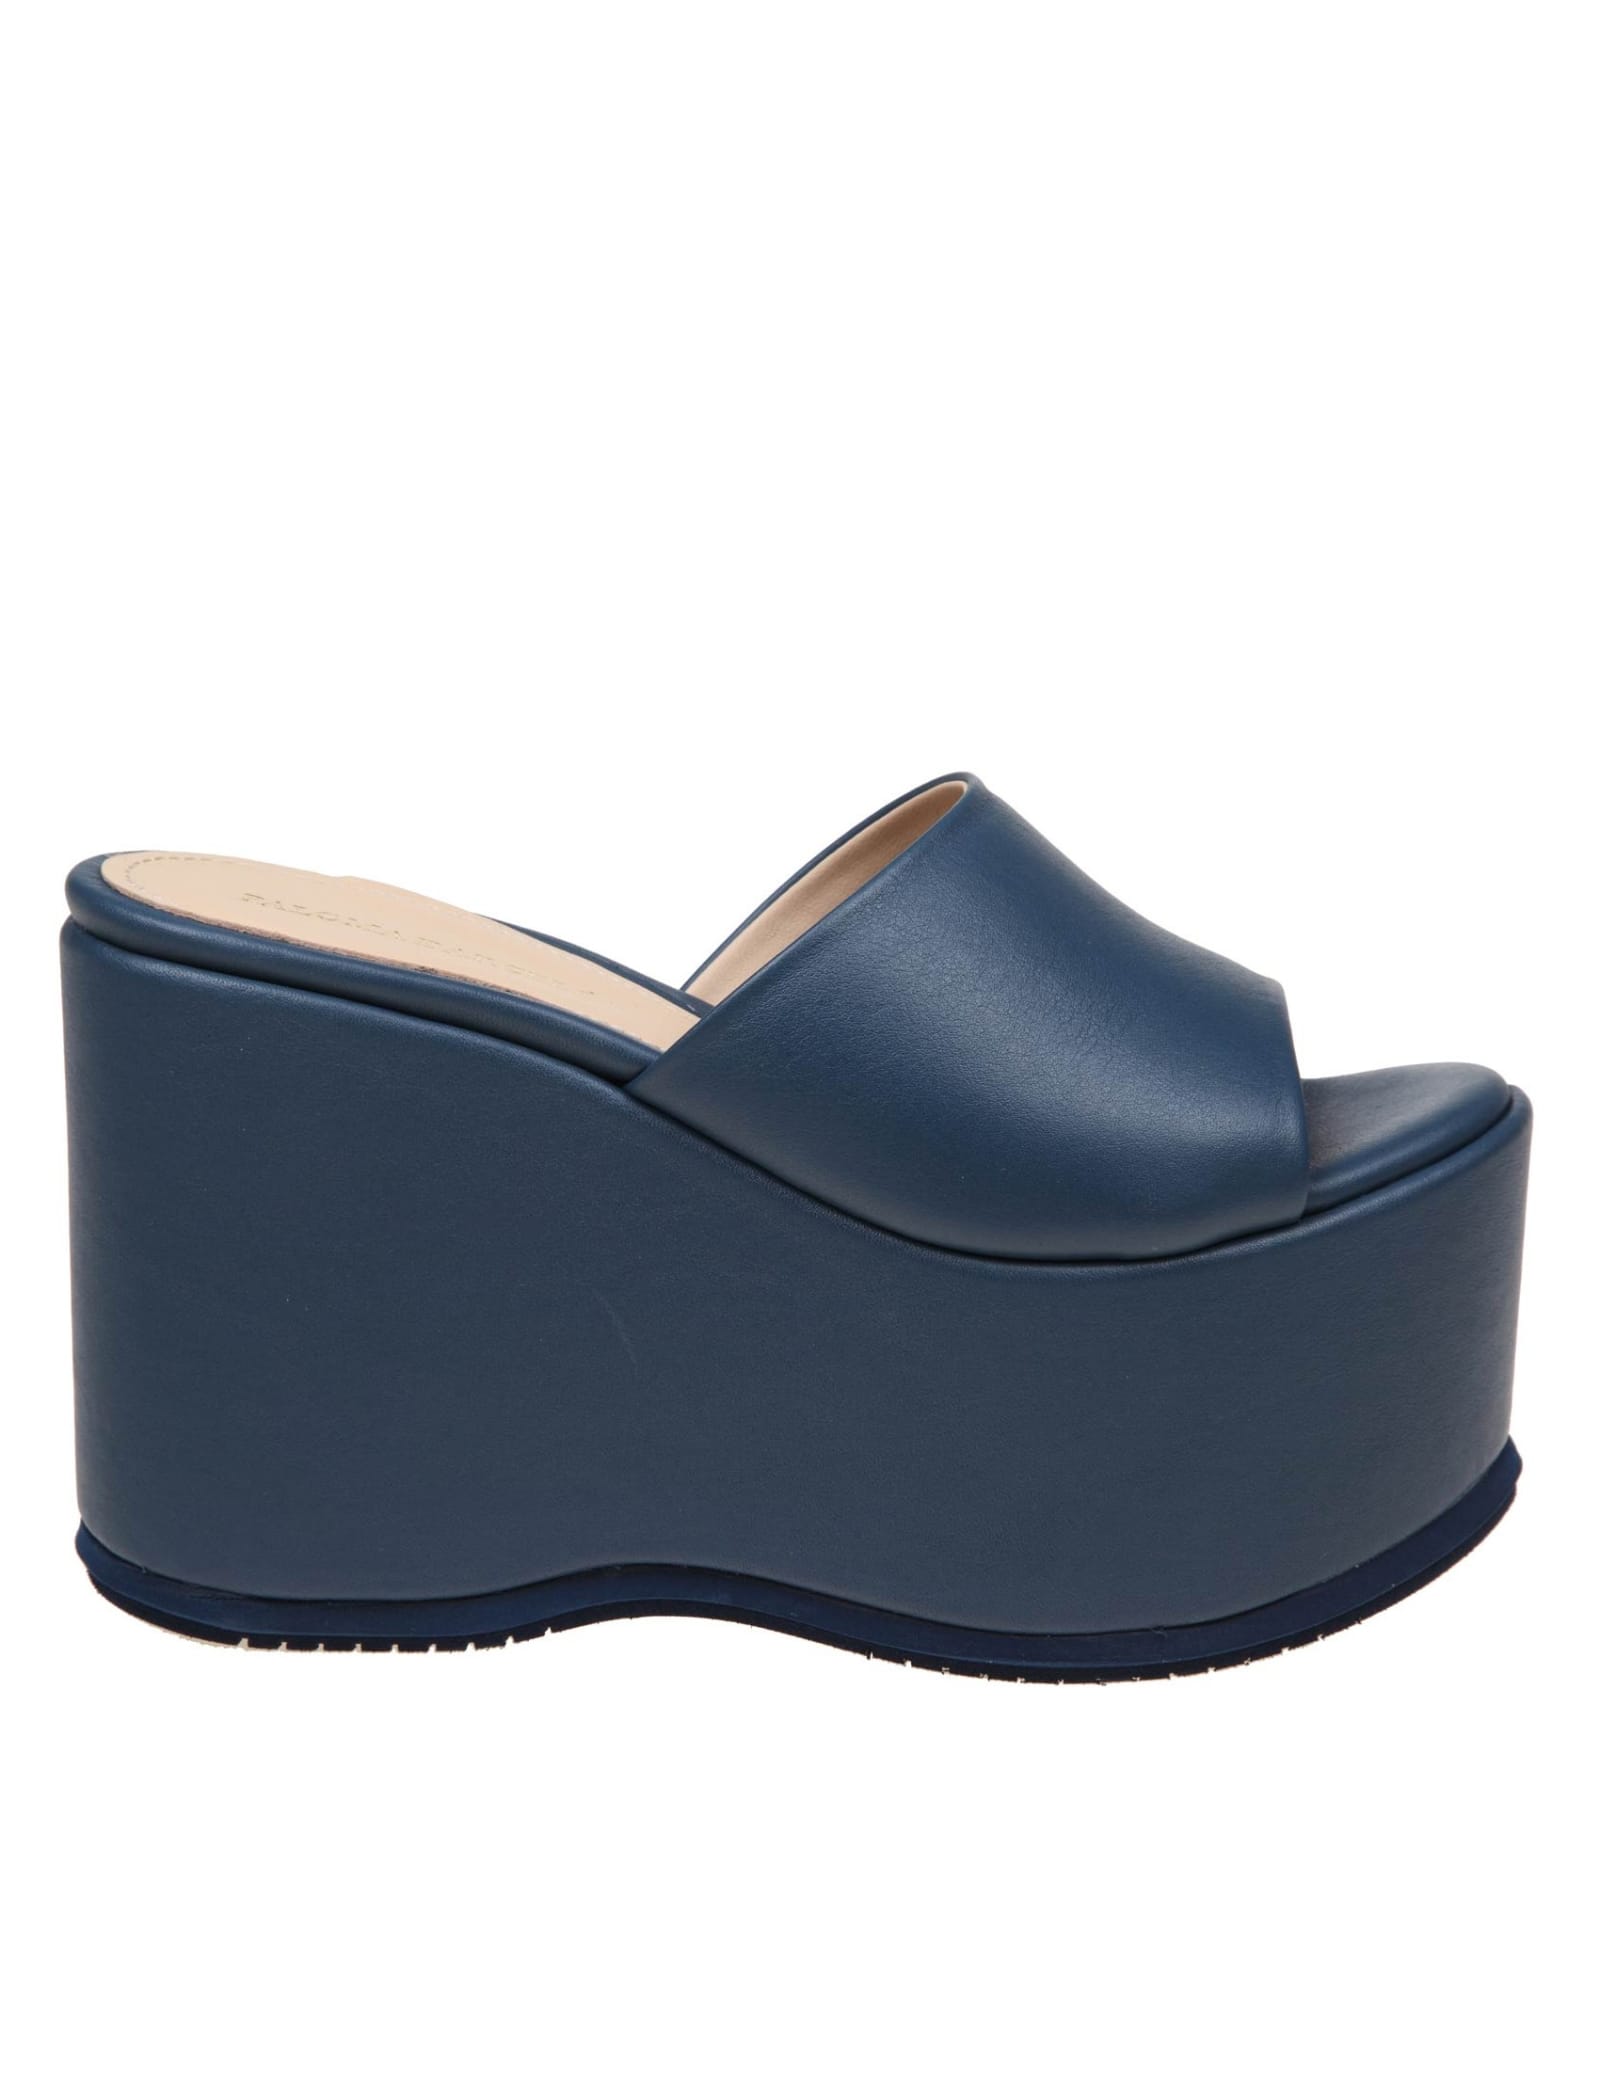 Paloma Barceló Hyana Mules In Blue Leather